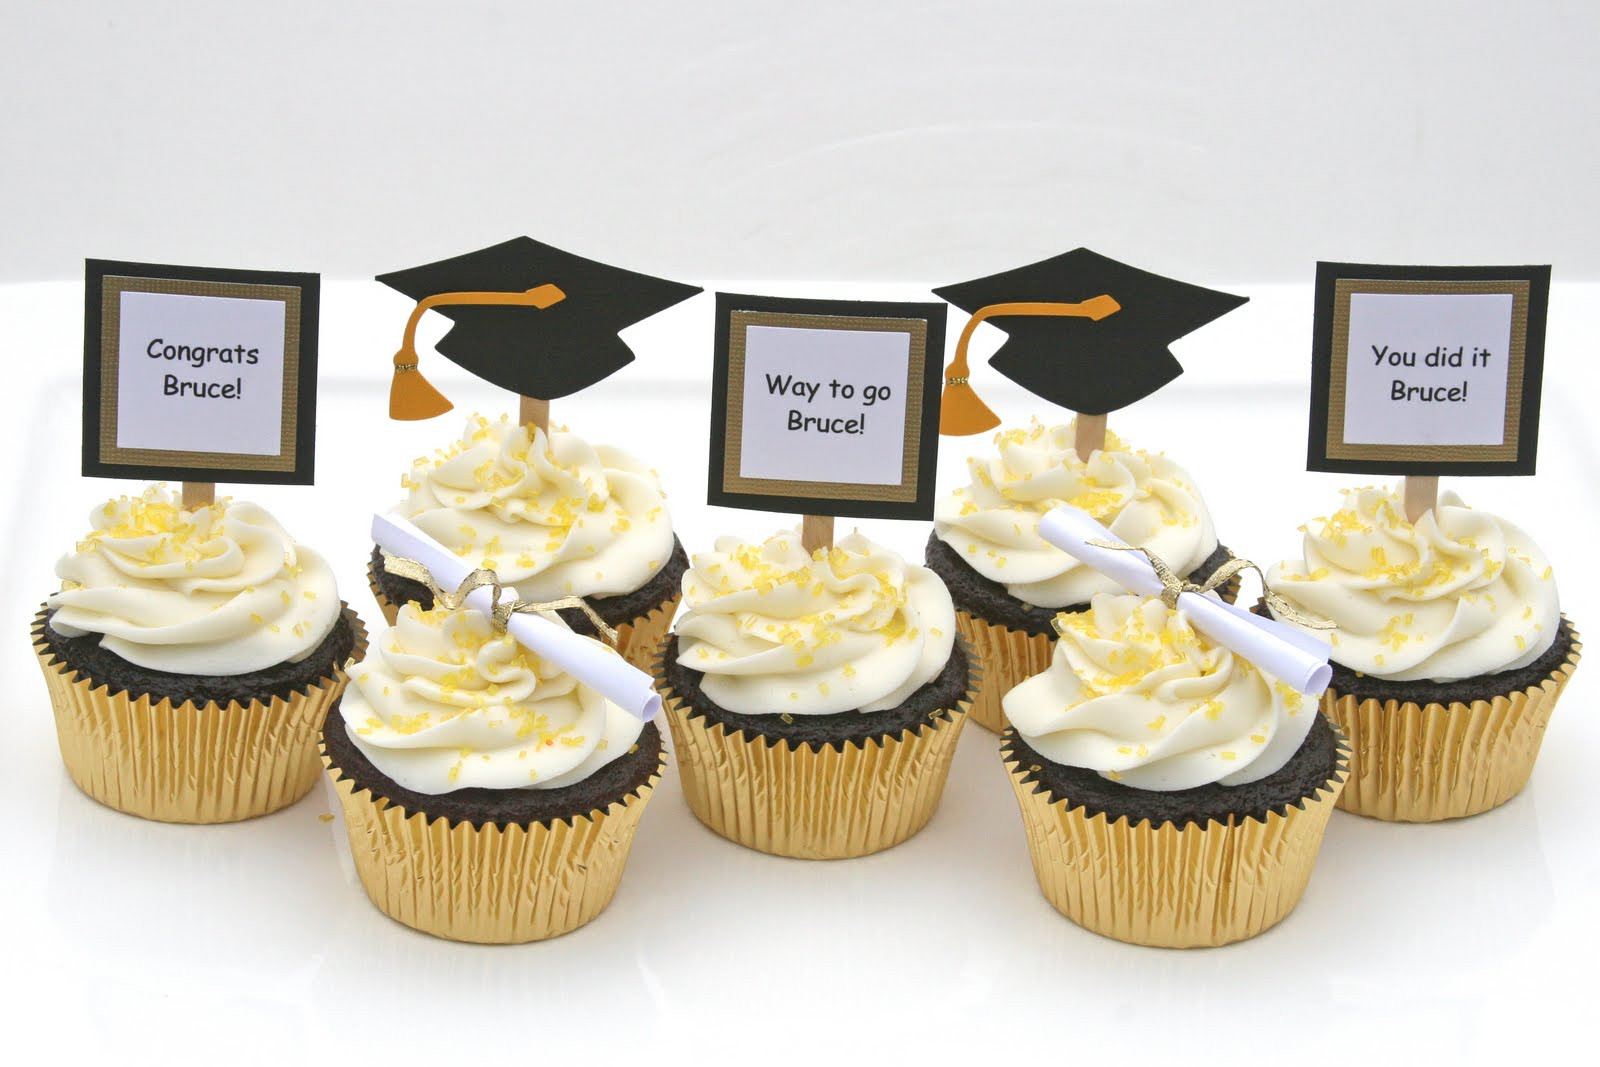 Cupcake Decorating Ideas Graduation Party
 Graduation Cupcakes with Do it yourself Toppers – Glorious